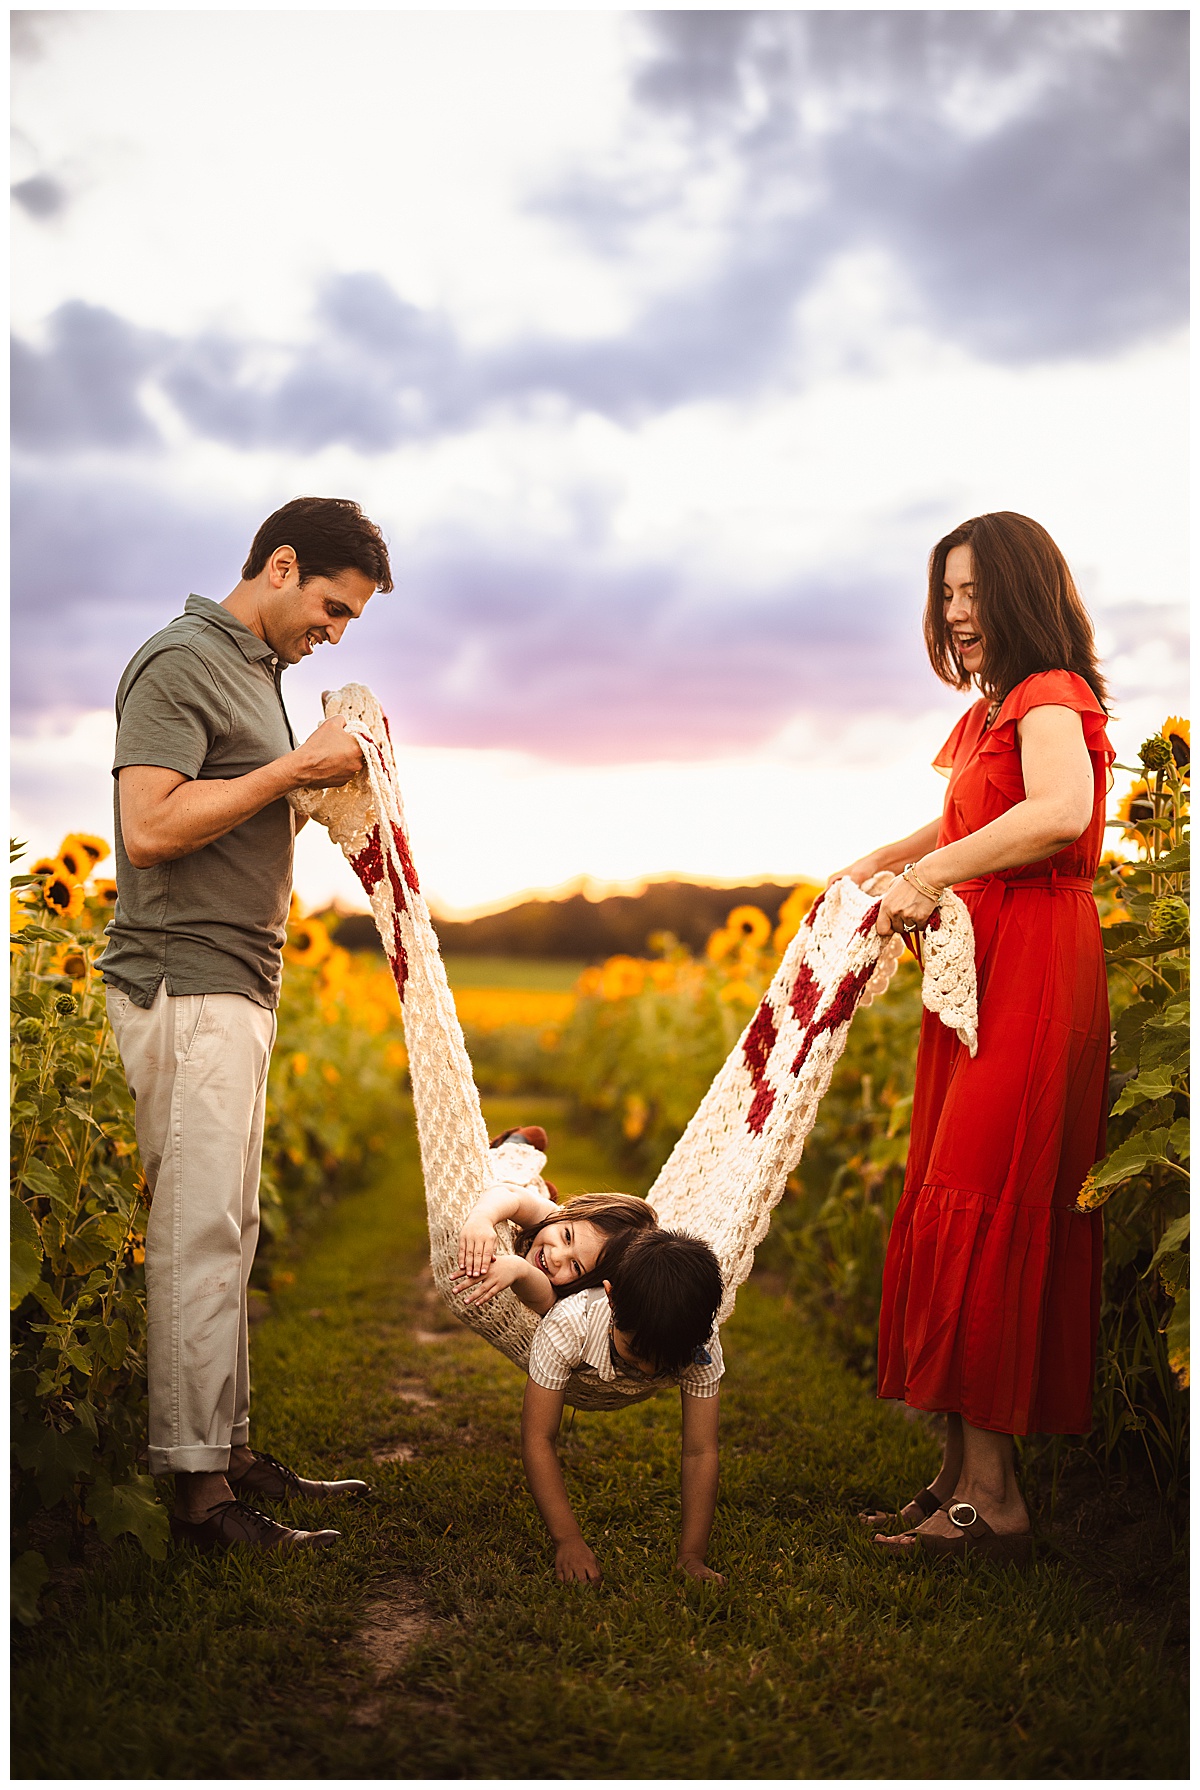 Parents play with their kids for Norma Fayak Photography